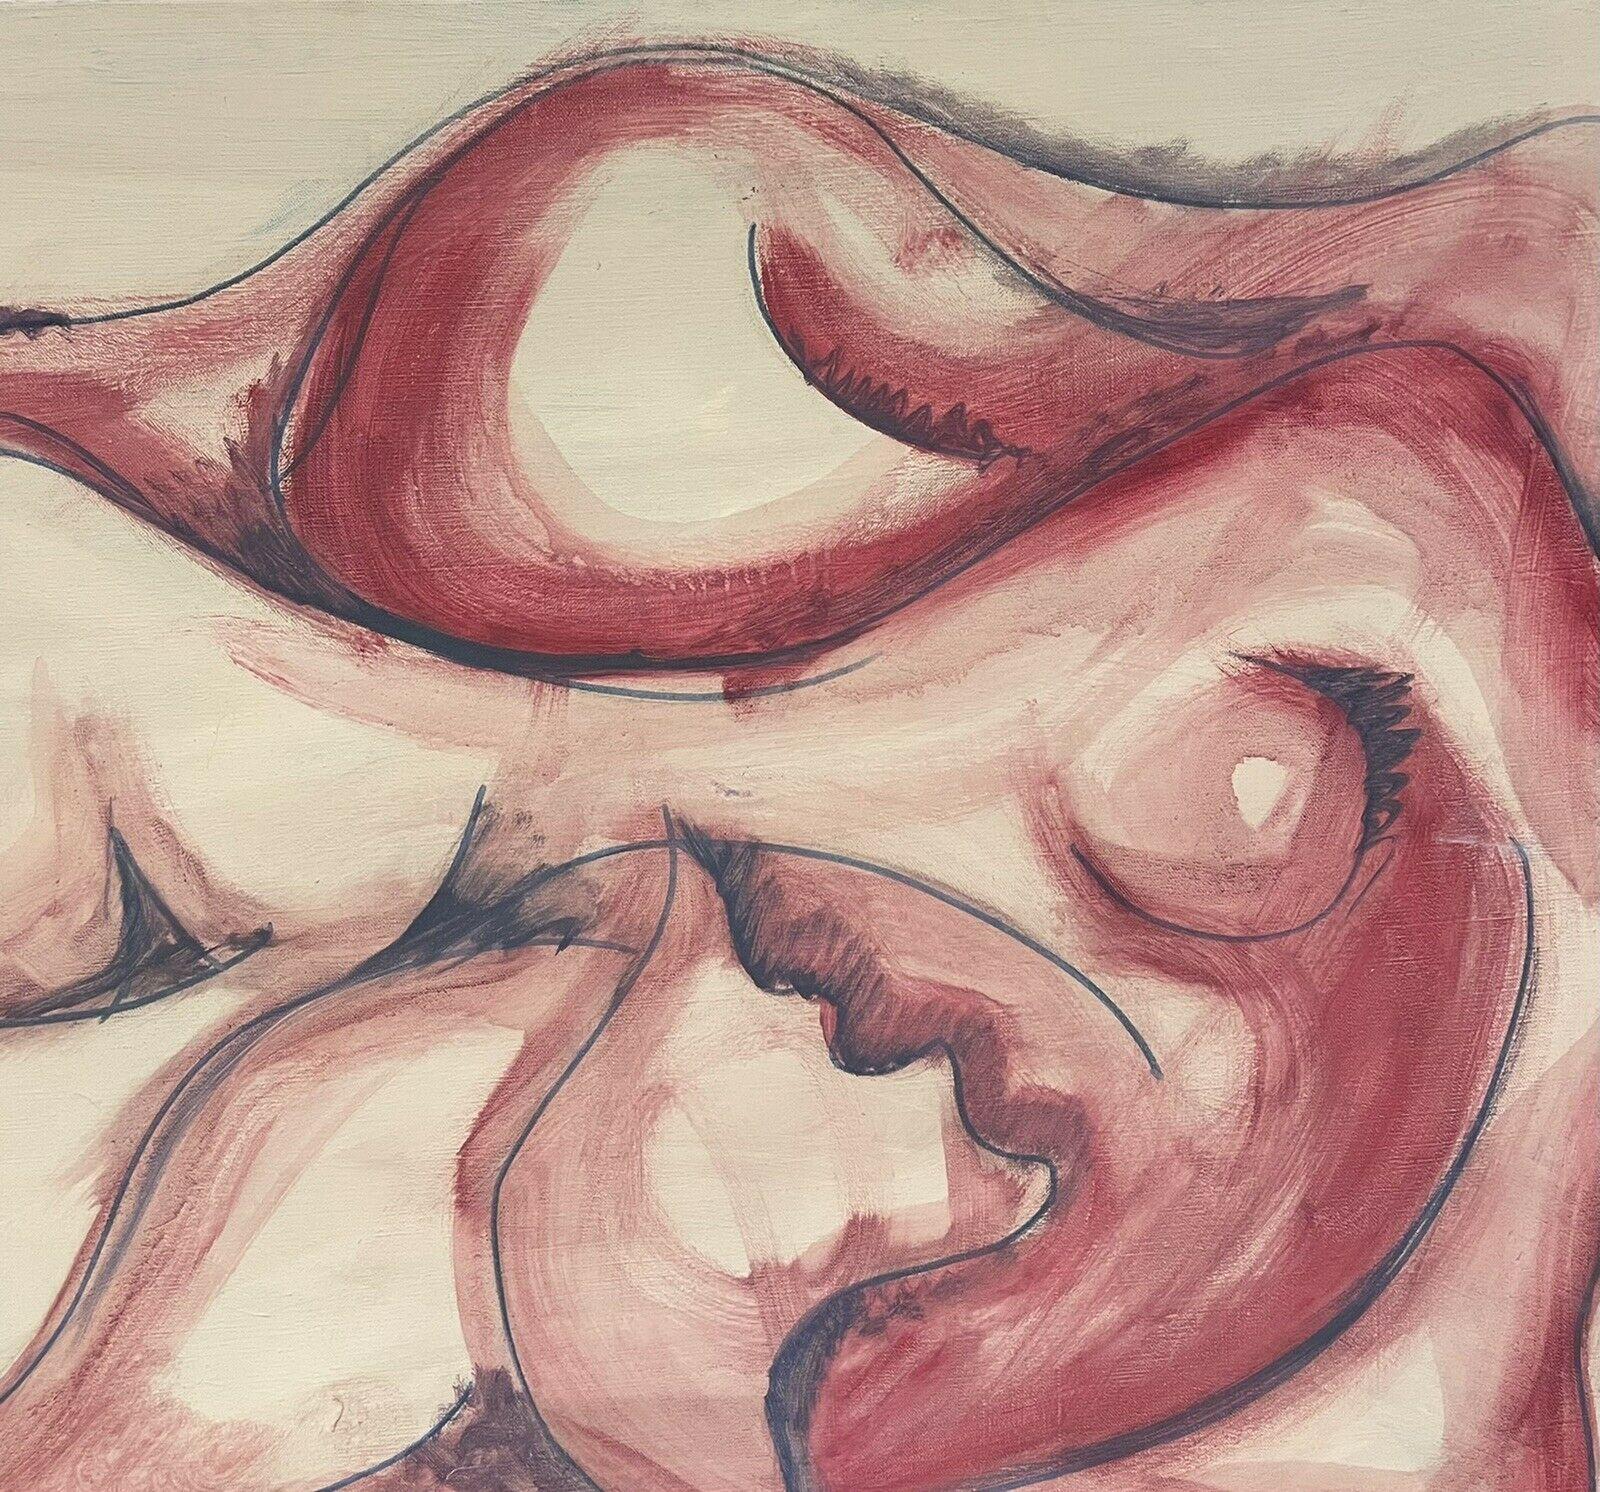 Artist/ School: Marcel Lucquet (French mid 20th century)

Title: Abstract composition depicting a nude figure form, painted in beautiful pink / light crimson colour against a white background. Housed in original 'studio frame'.

Medium:  oil